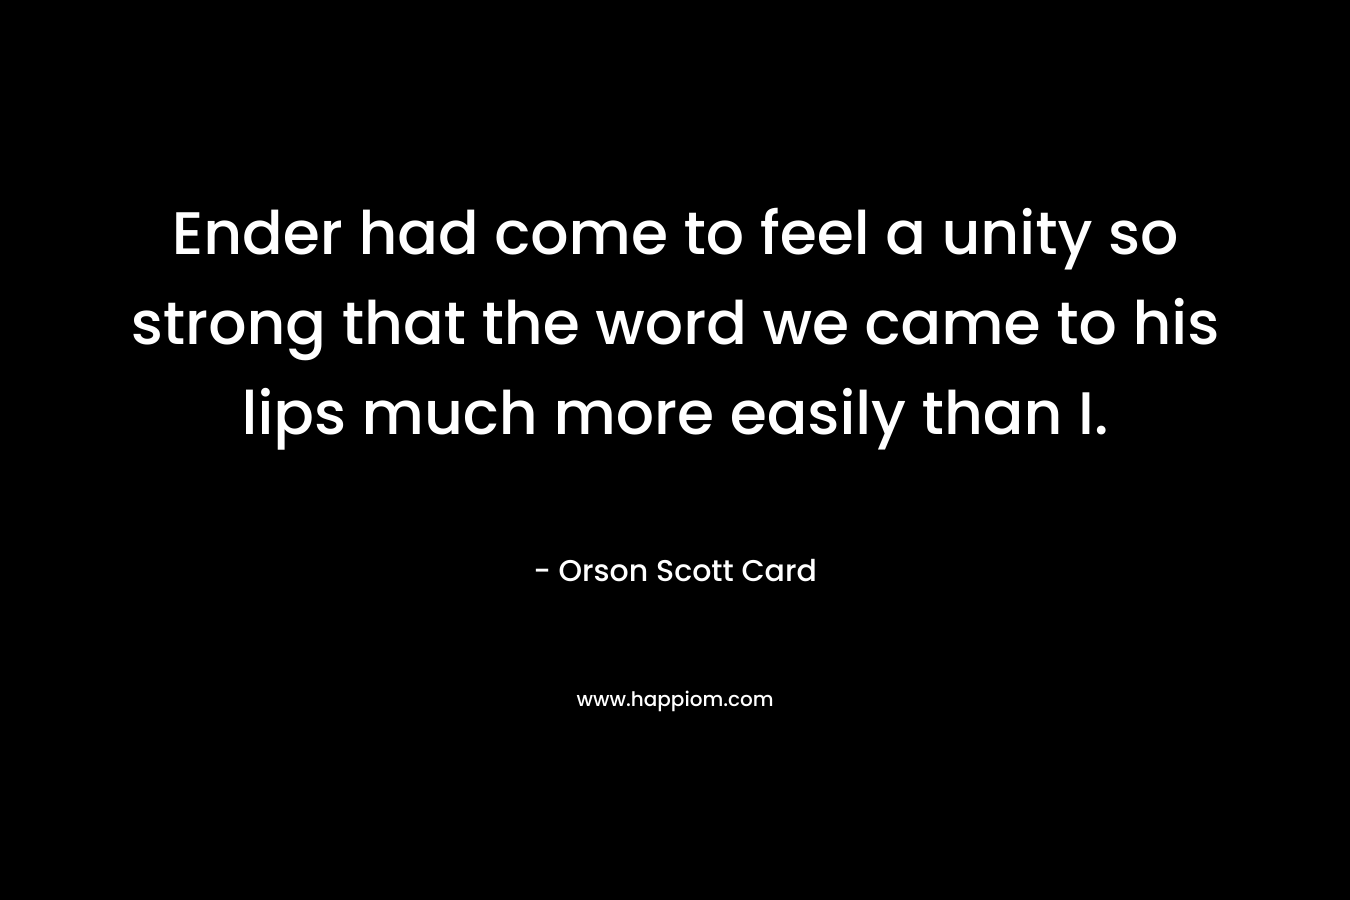 Ender had come to feel a unity so strong that the word we came to his lips much more easily than I.